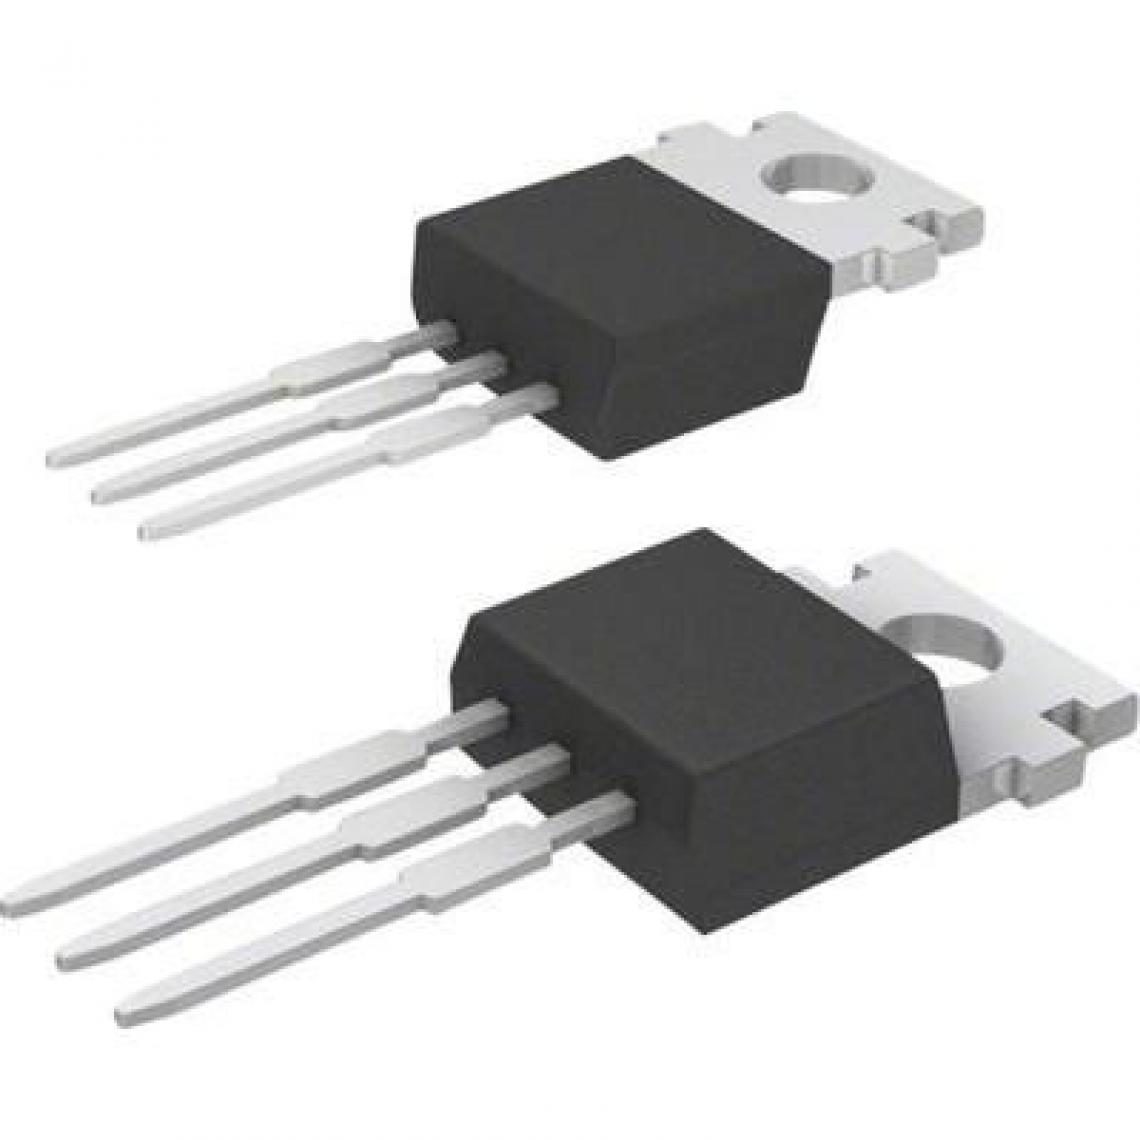 Inconnu - MOSFET ON Semiconductor RFP50N06 1 Canal N TO-220AB 1 pc(s) - Fiches électriques